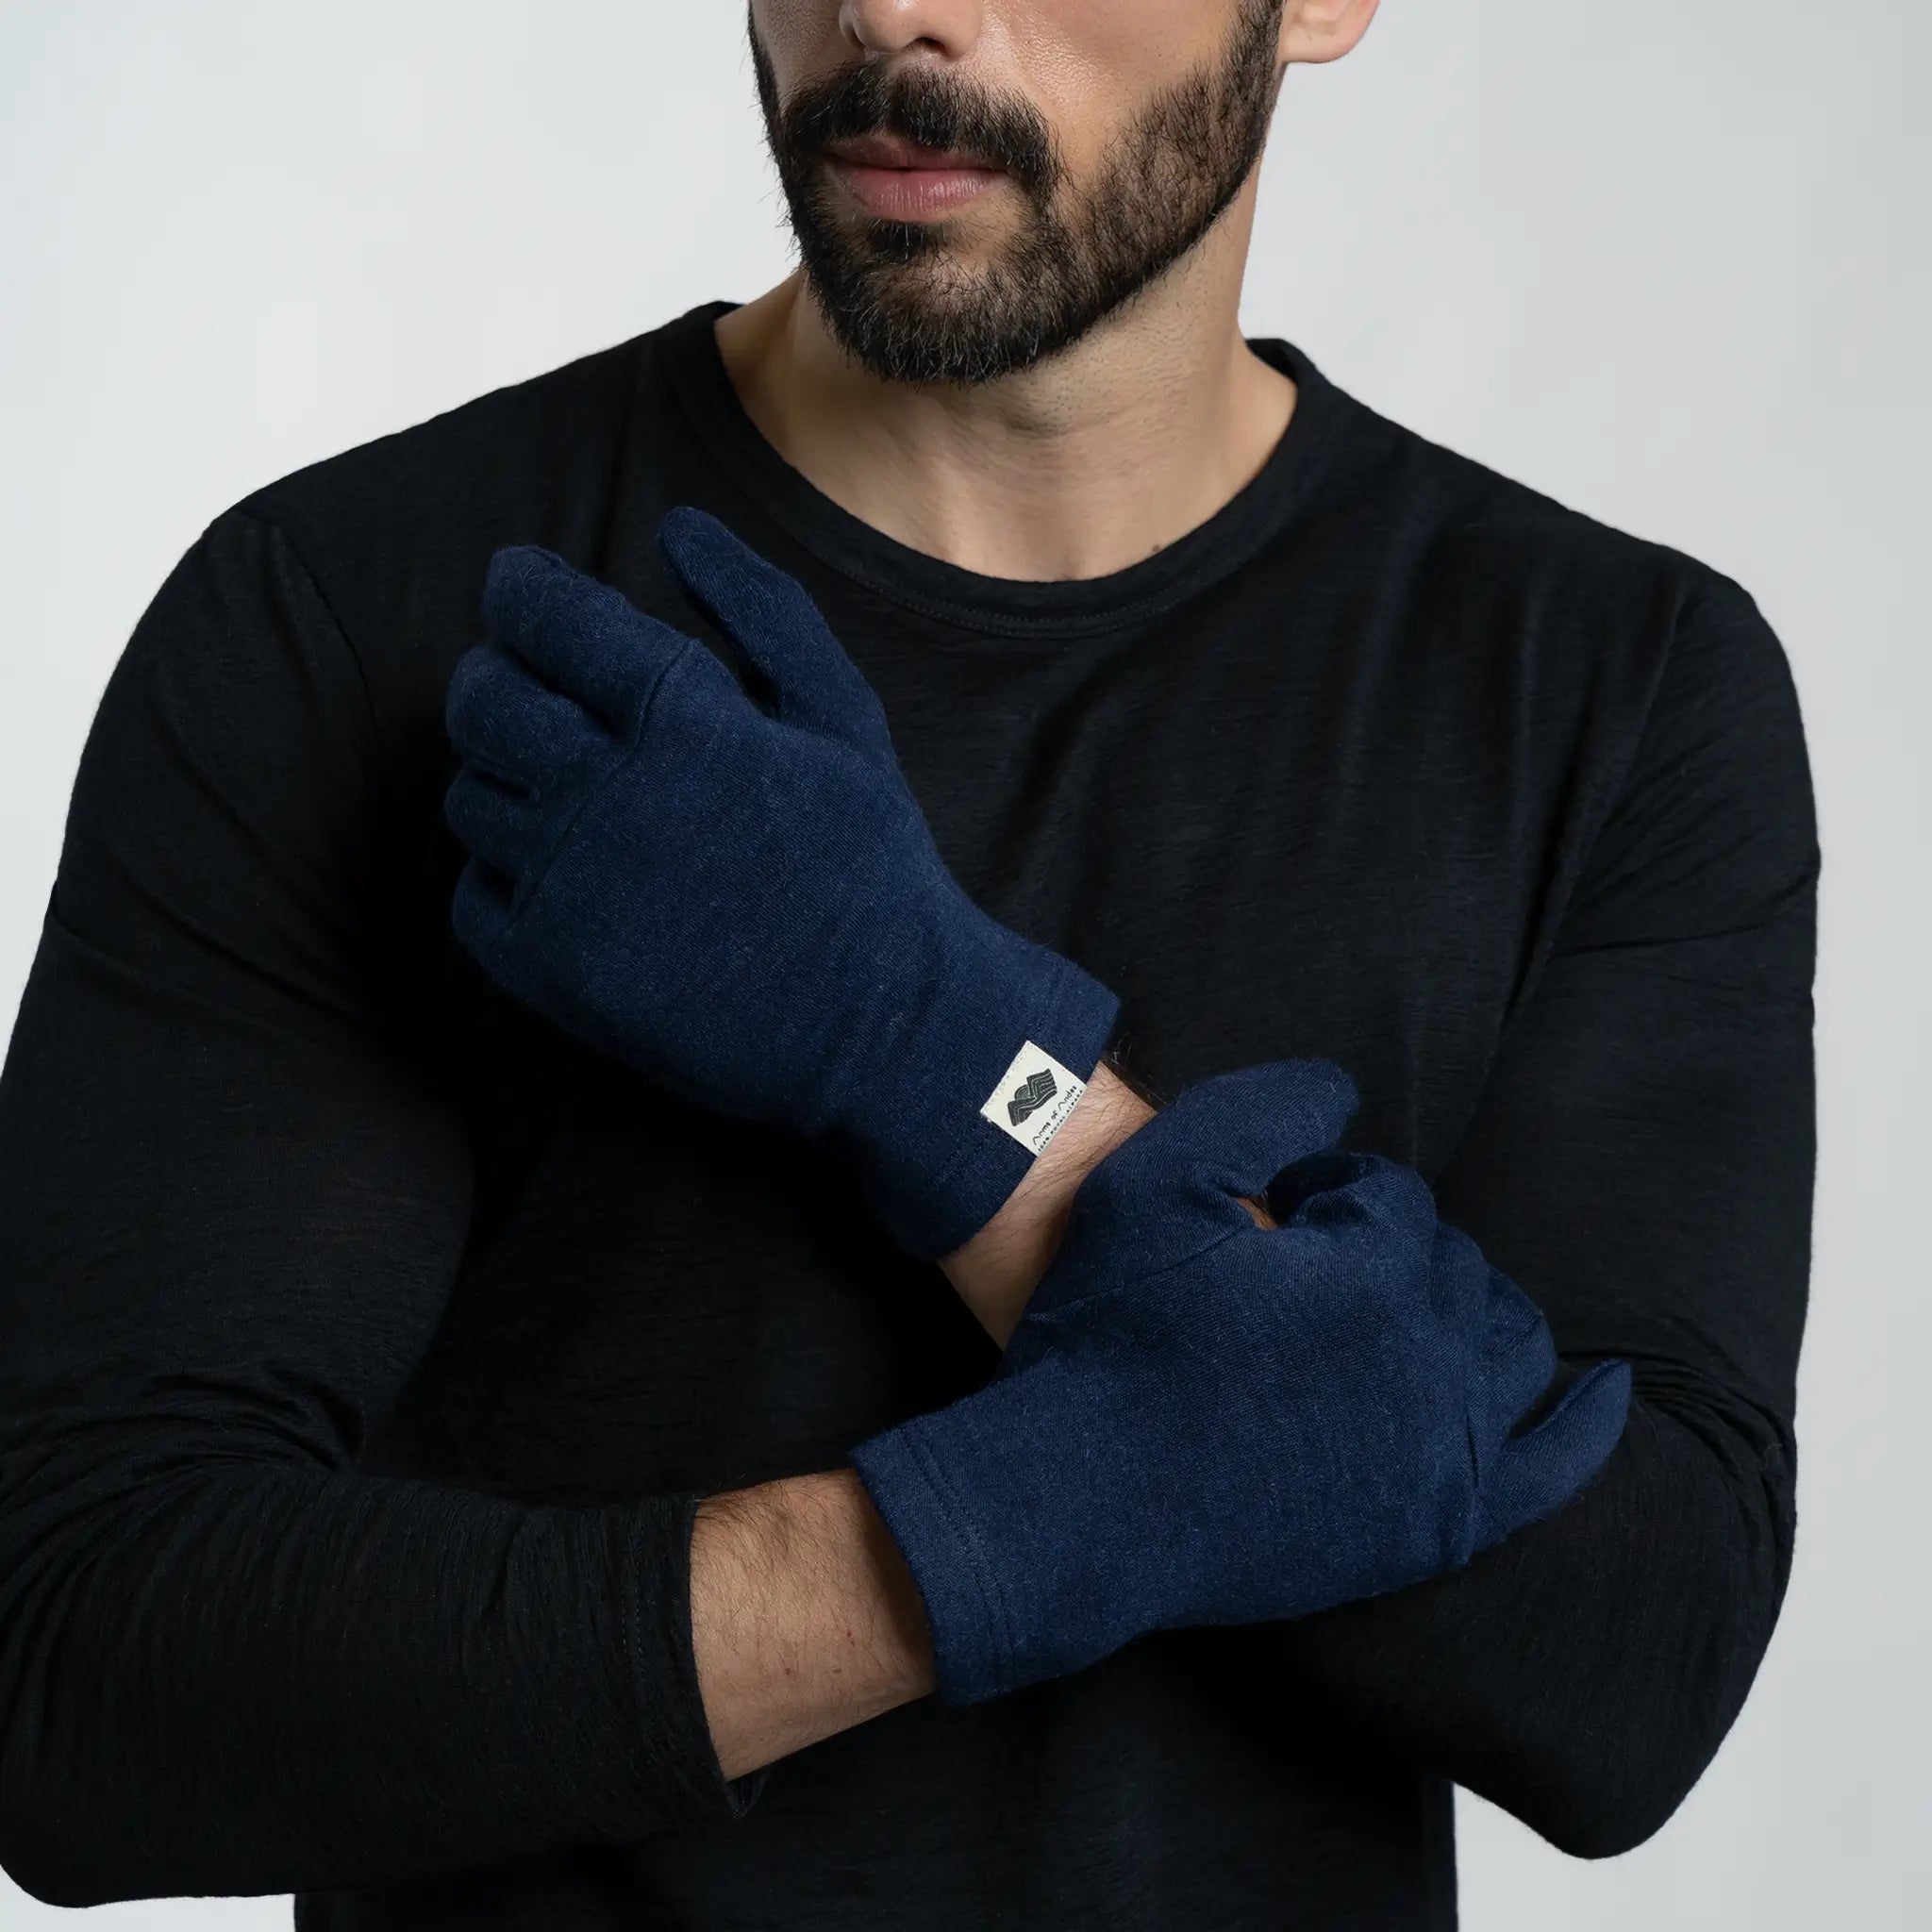 breathable gloves lightweight color navy blue